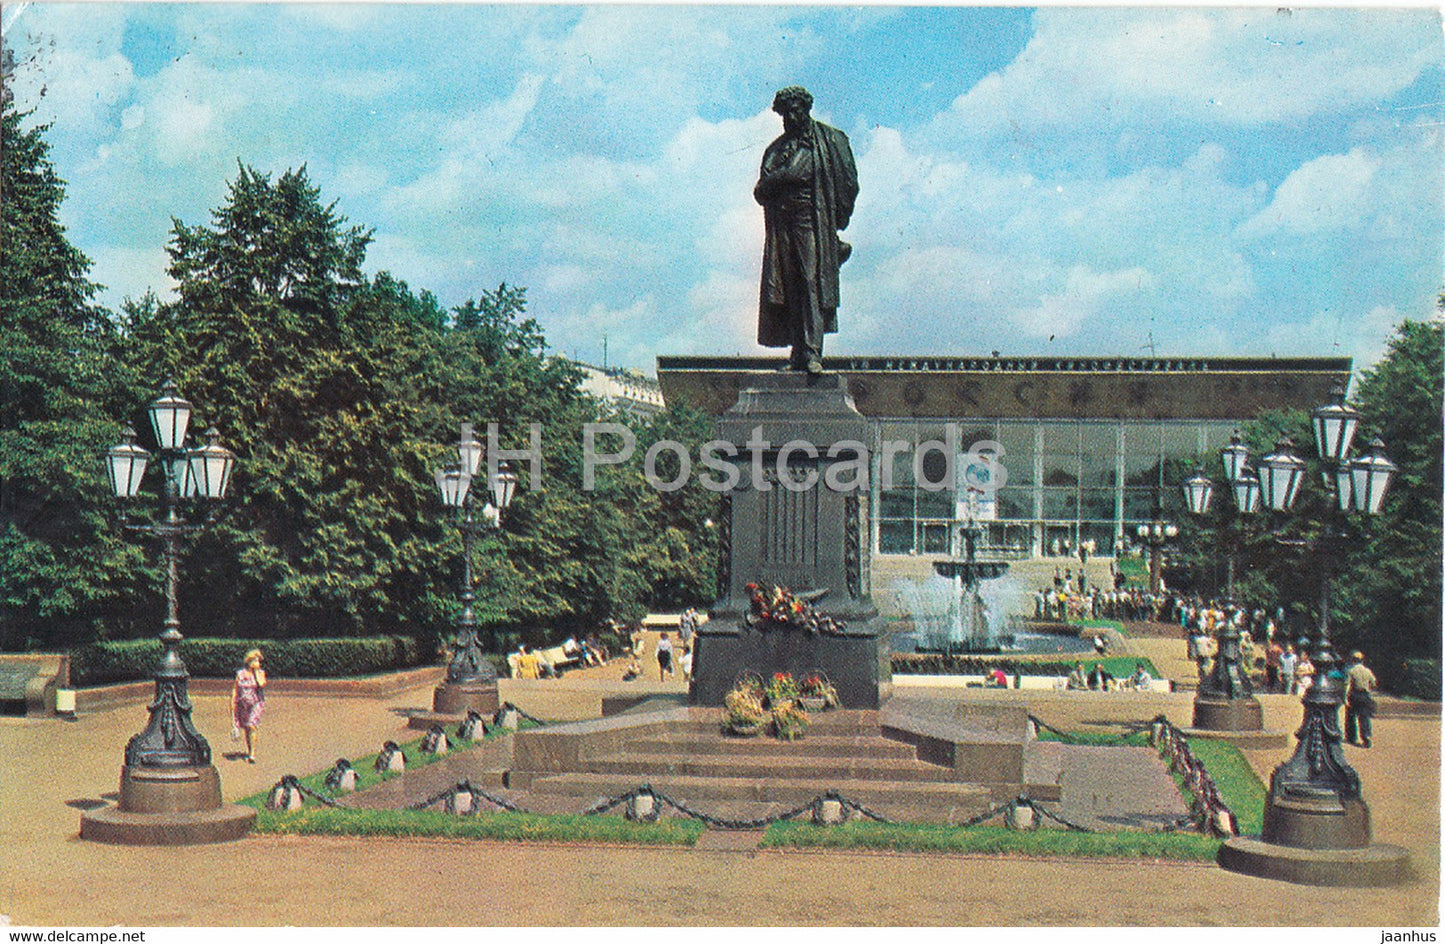 Moscow - monument to Russian Poet Pushkin - 1975 - Russia USSR - used - JH Postcards